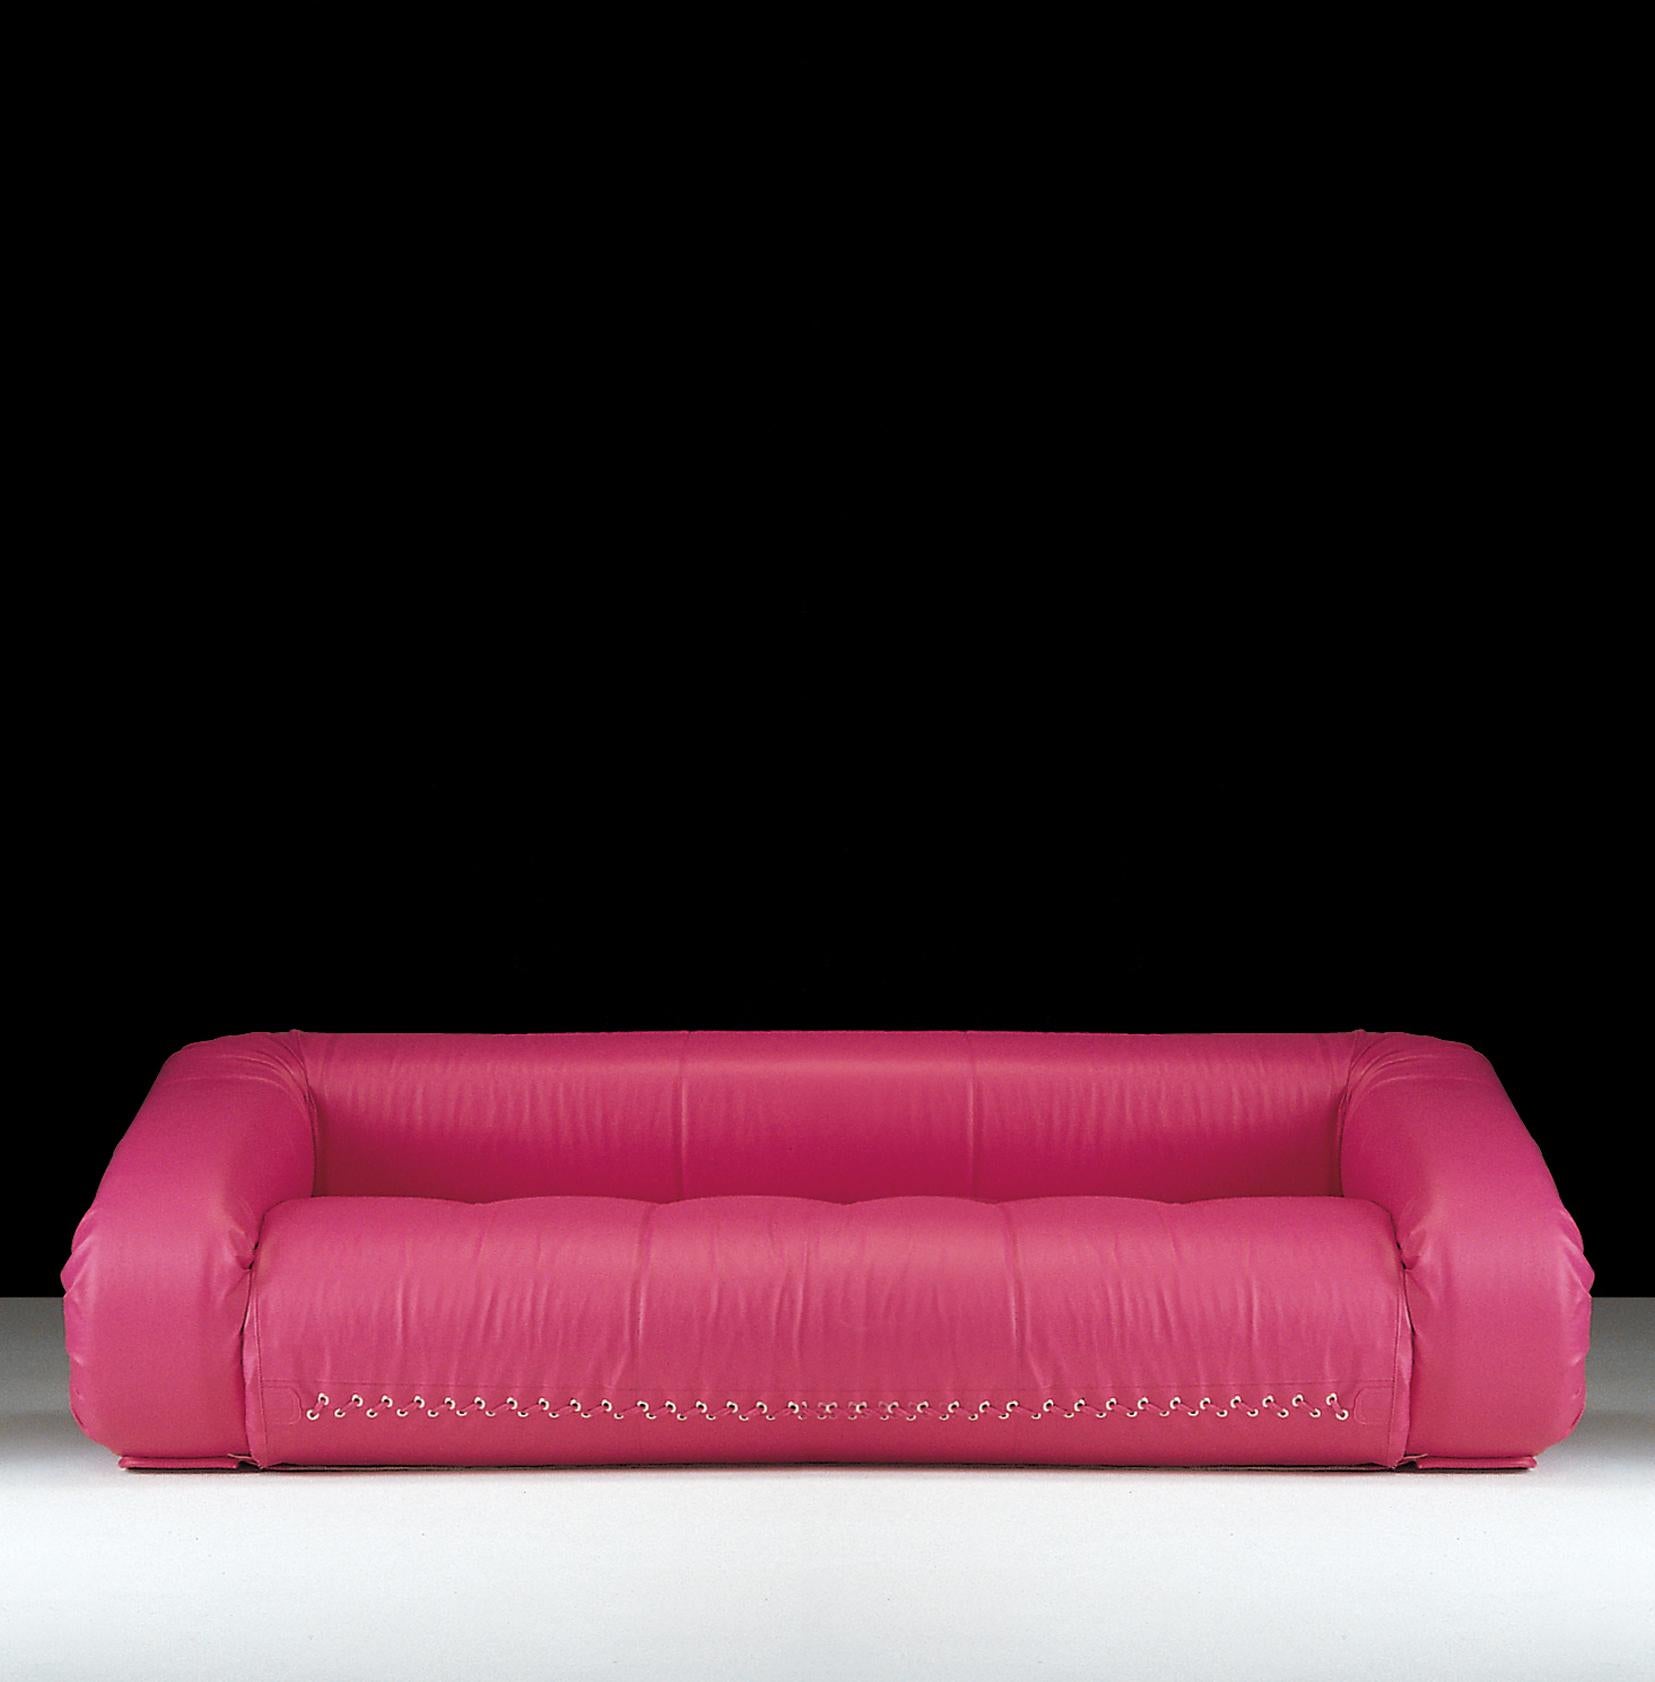 Moderne 1970 Anfibio Foldability Sofà Bed Pink Coated Fabric Becchi Giovannetti en vente